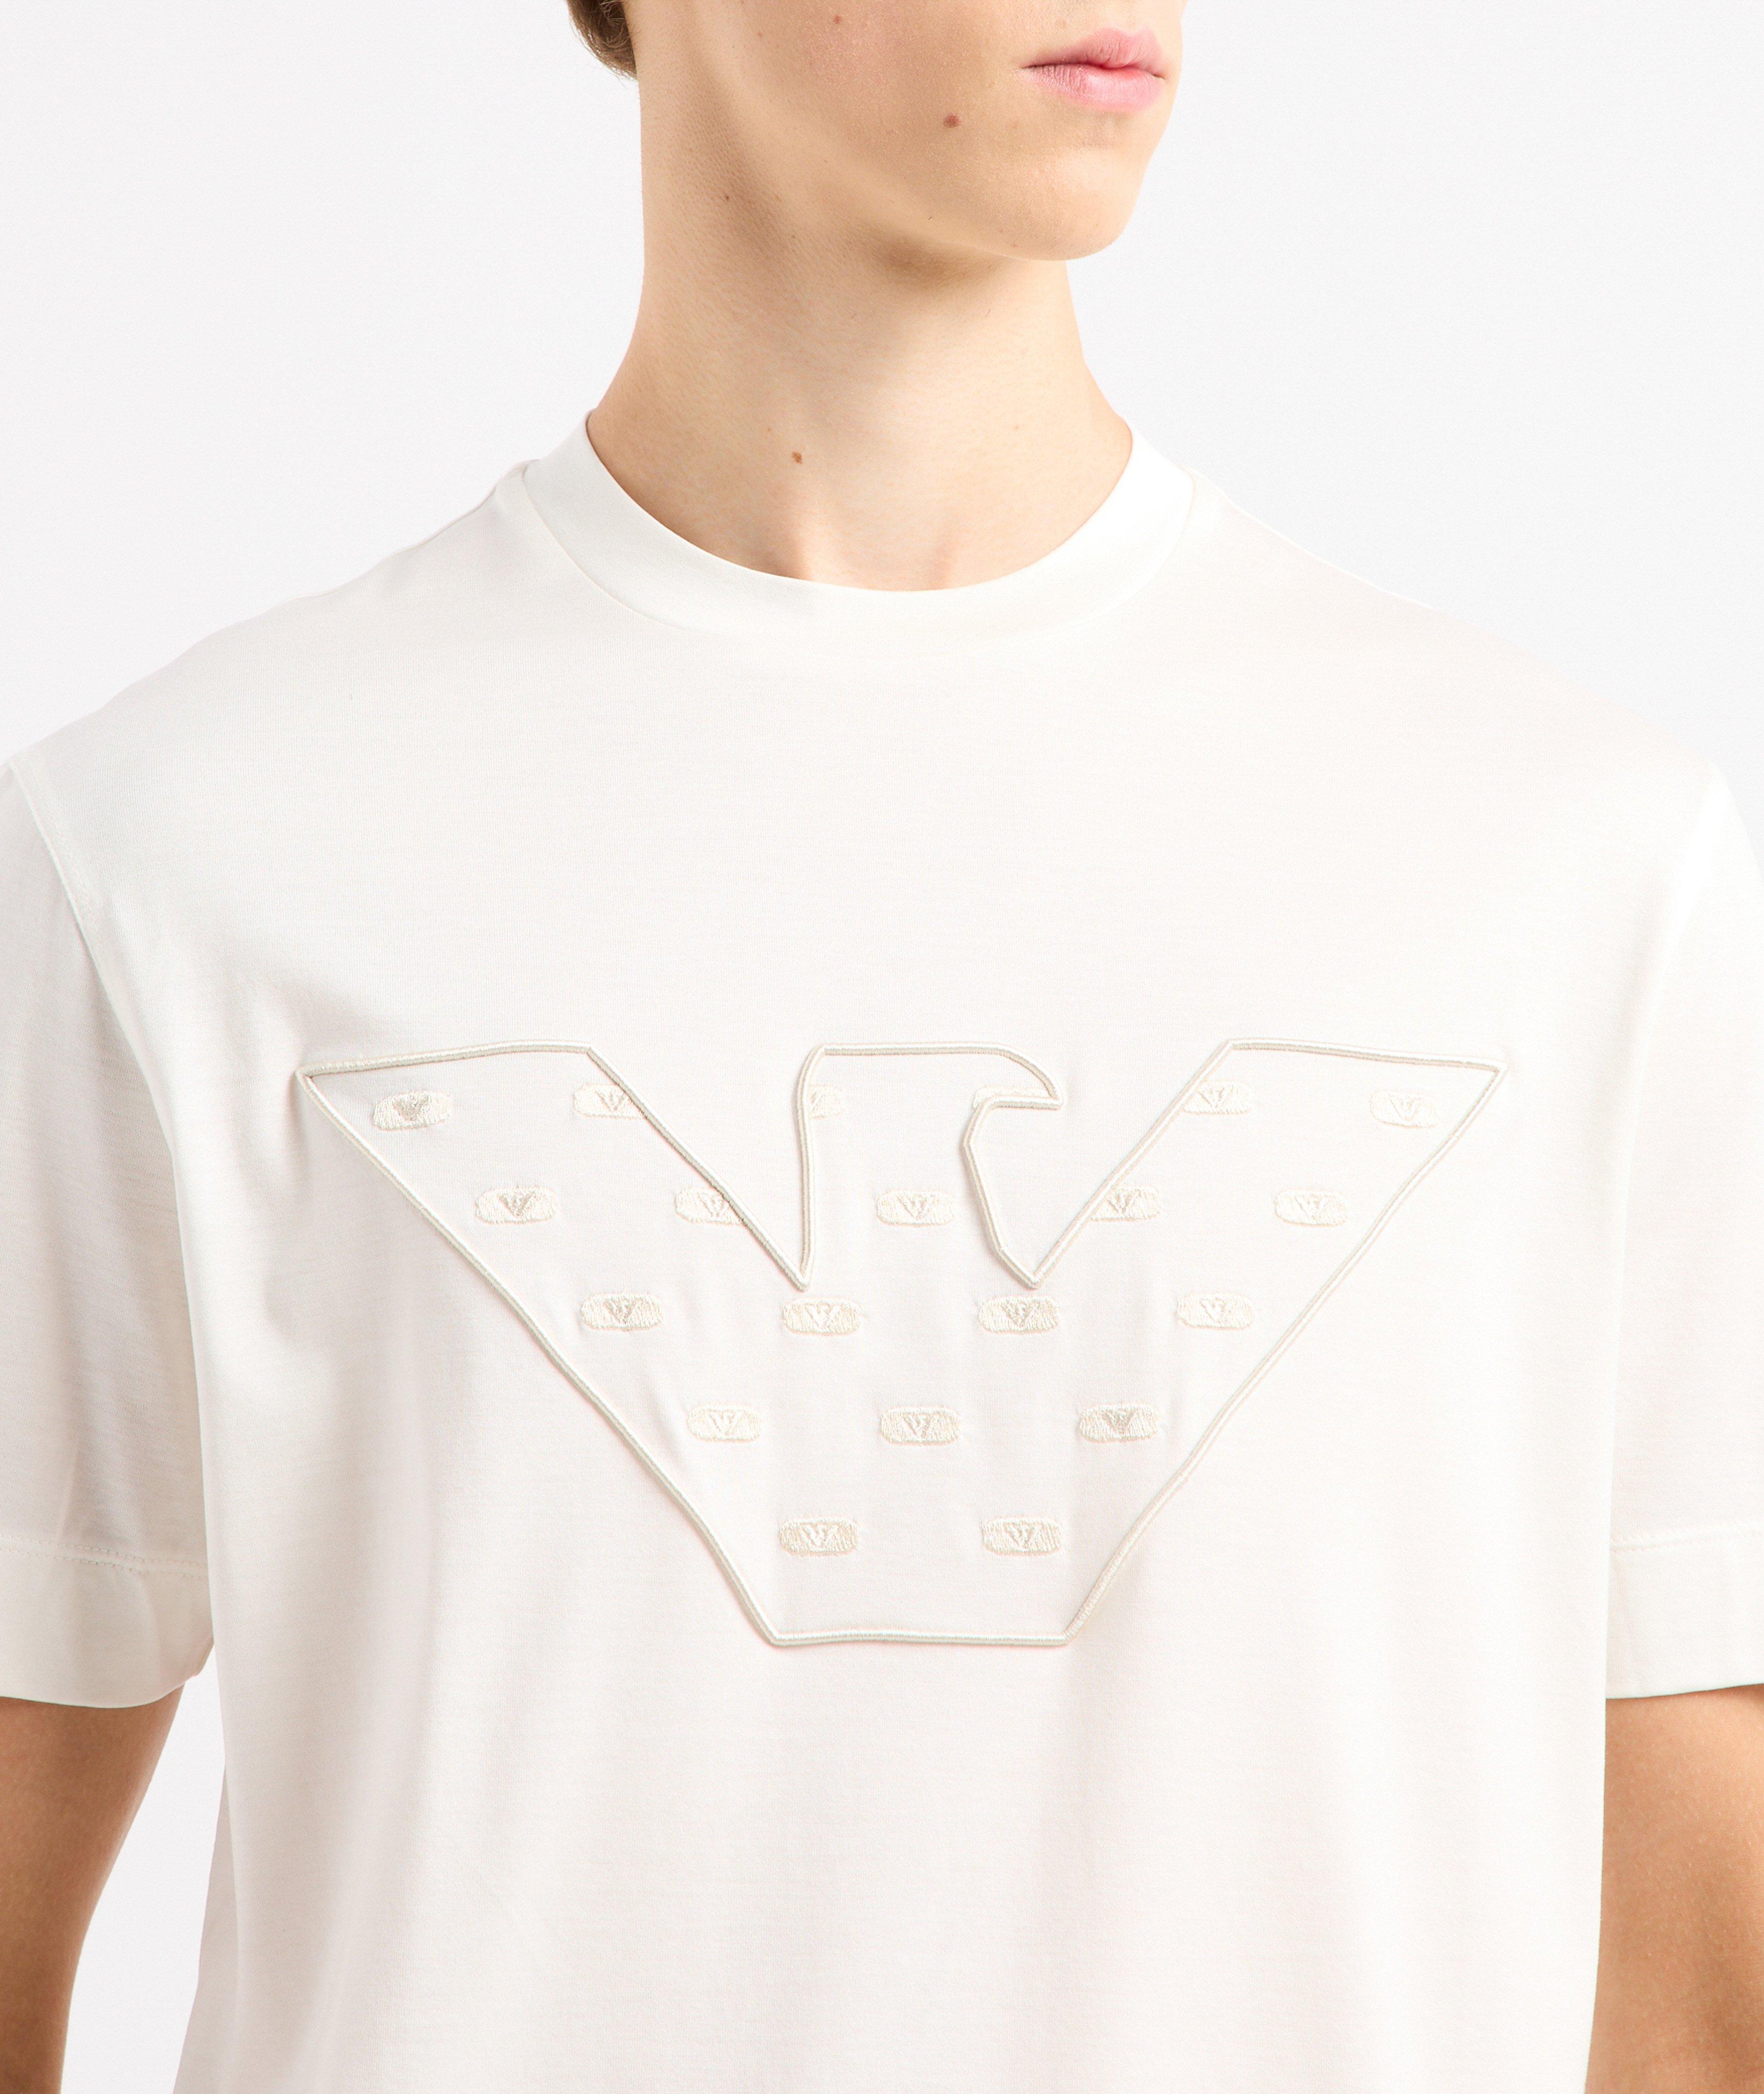 Tonal Embroidered Logo Lyocell-Cotton T-Shirt image 3